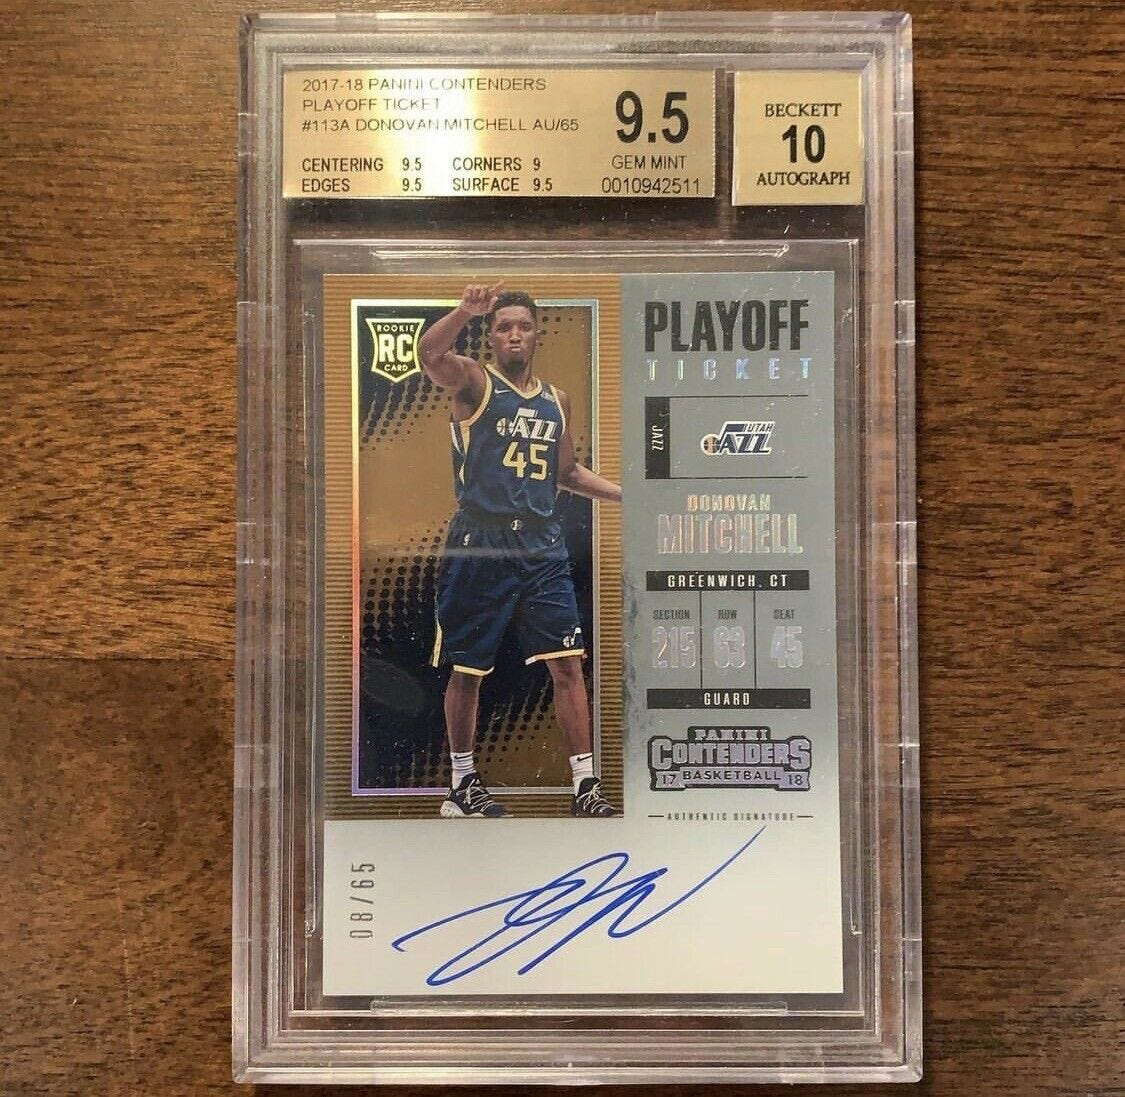 Image 1 - 2017-18 Contenders PLAYOFF Ticket Donovan Mitchell RC Rookie AUTO /65 BGS 9.5/10